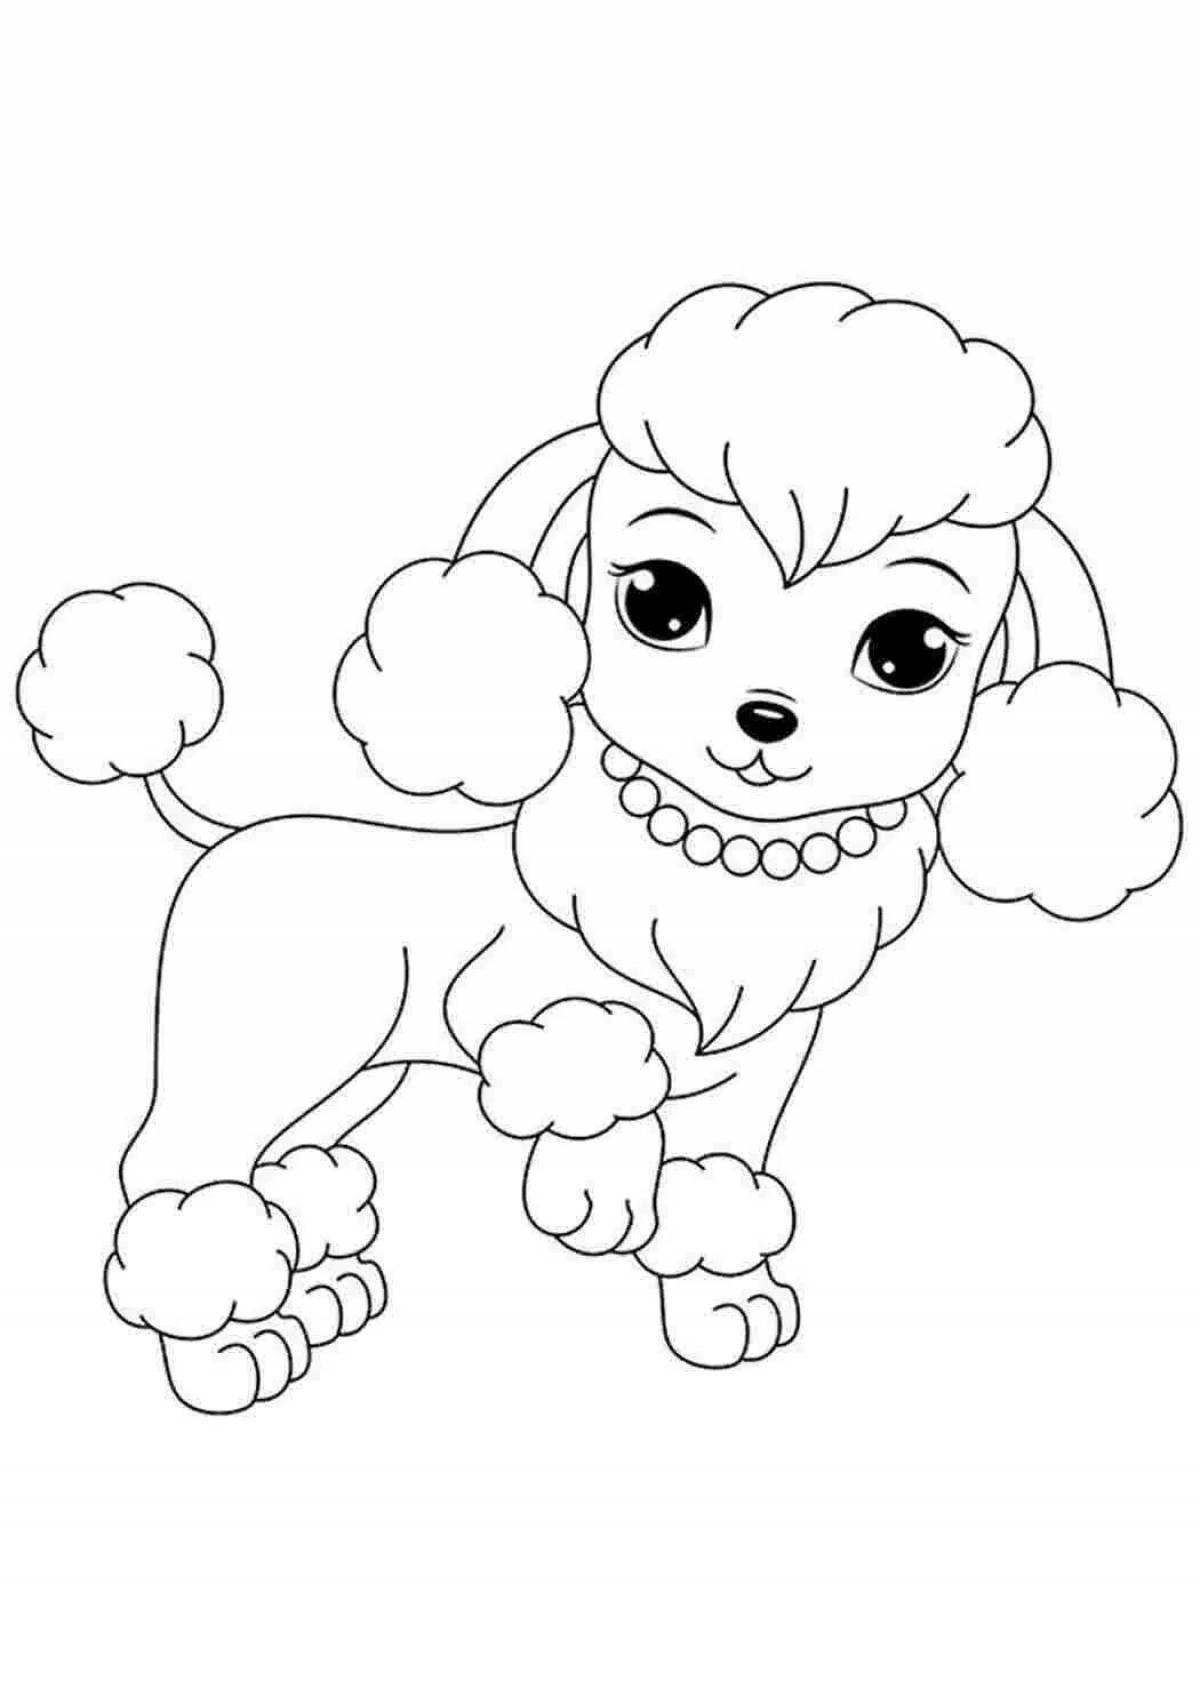 Affectionate cute dog coloring book